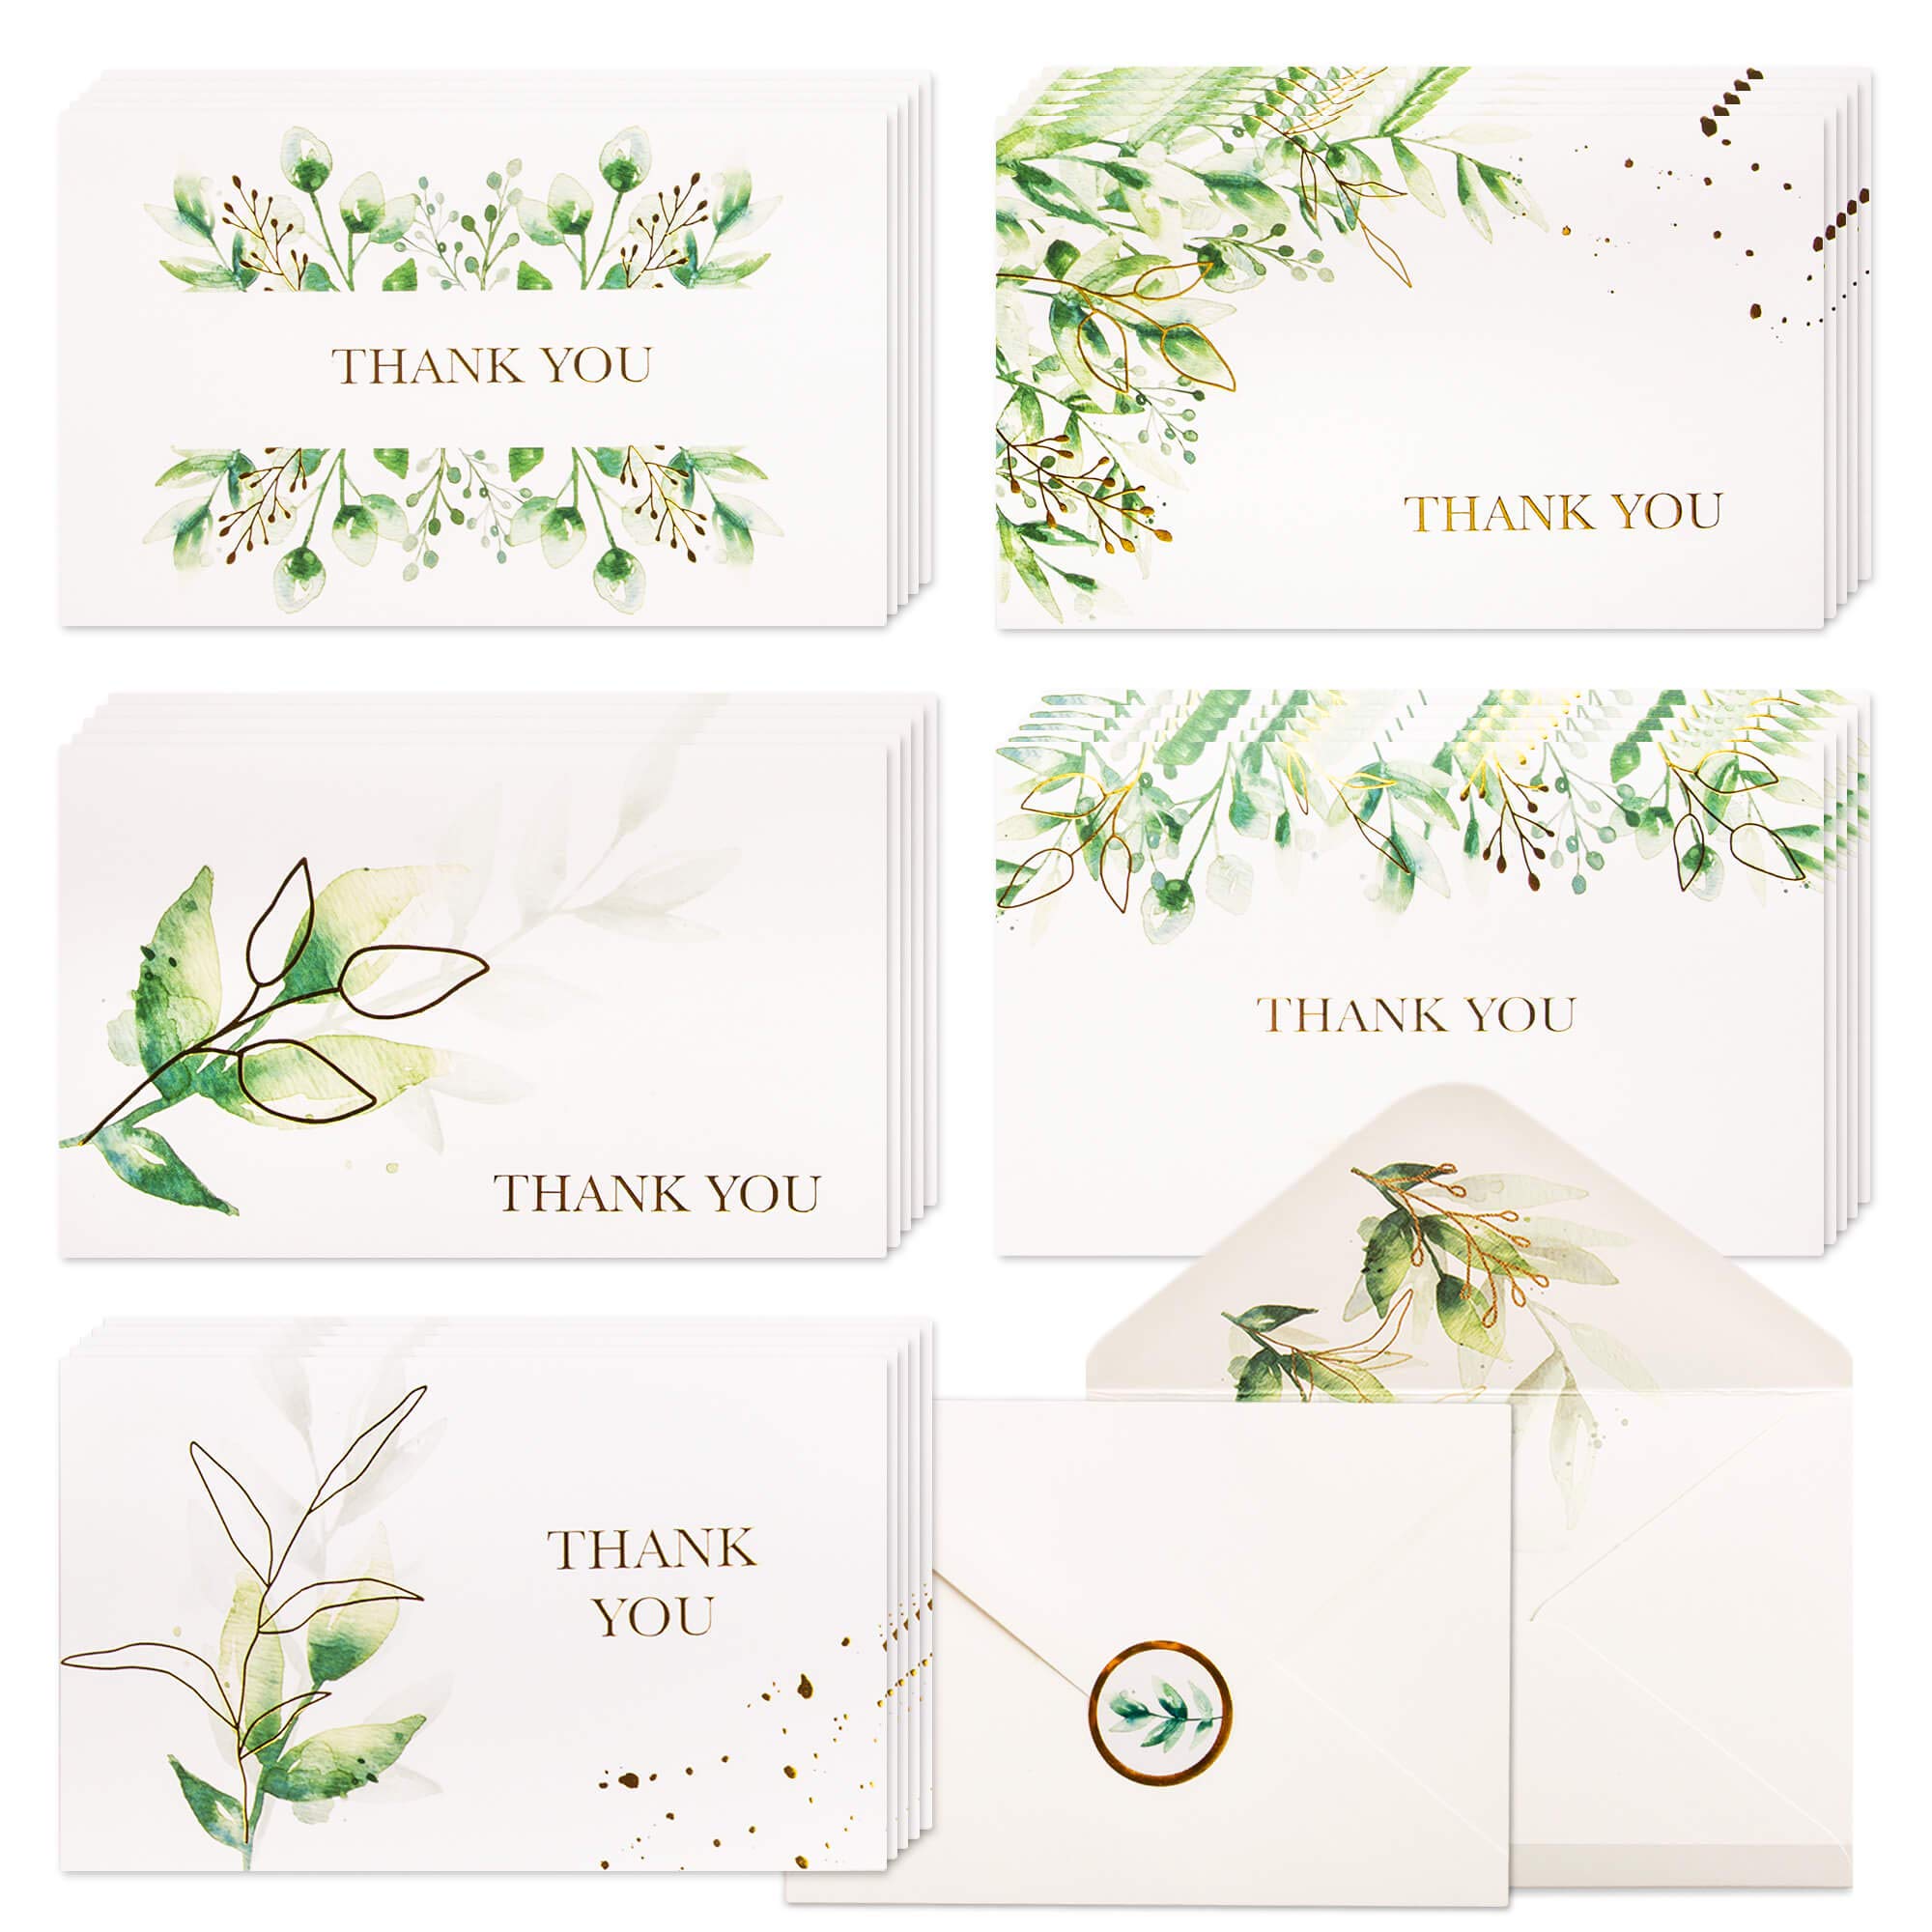 100 Greenery & Gold Foil Thank You Cards w/ Envelopes & Stickers, Bulk Boxed Set Assortment of Watercolor Green Leaves Floral Notes, Assorted Botanical Cards Pack for Wedding / Baby Shower